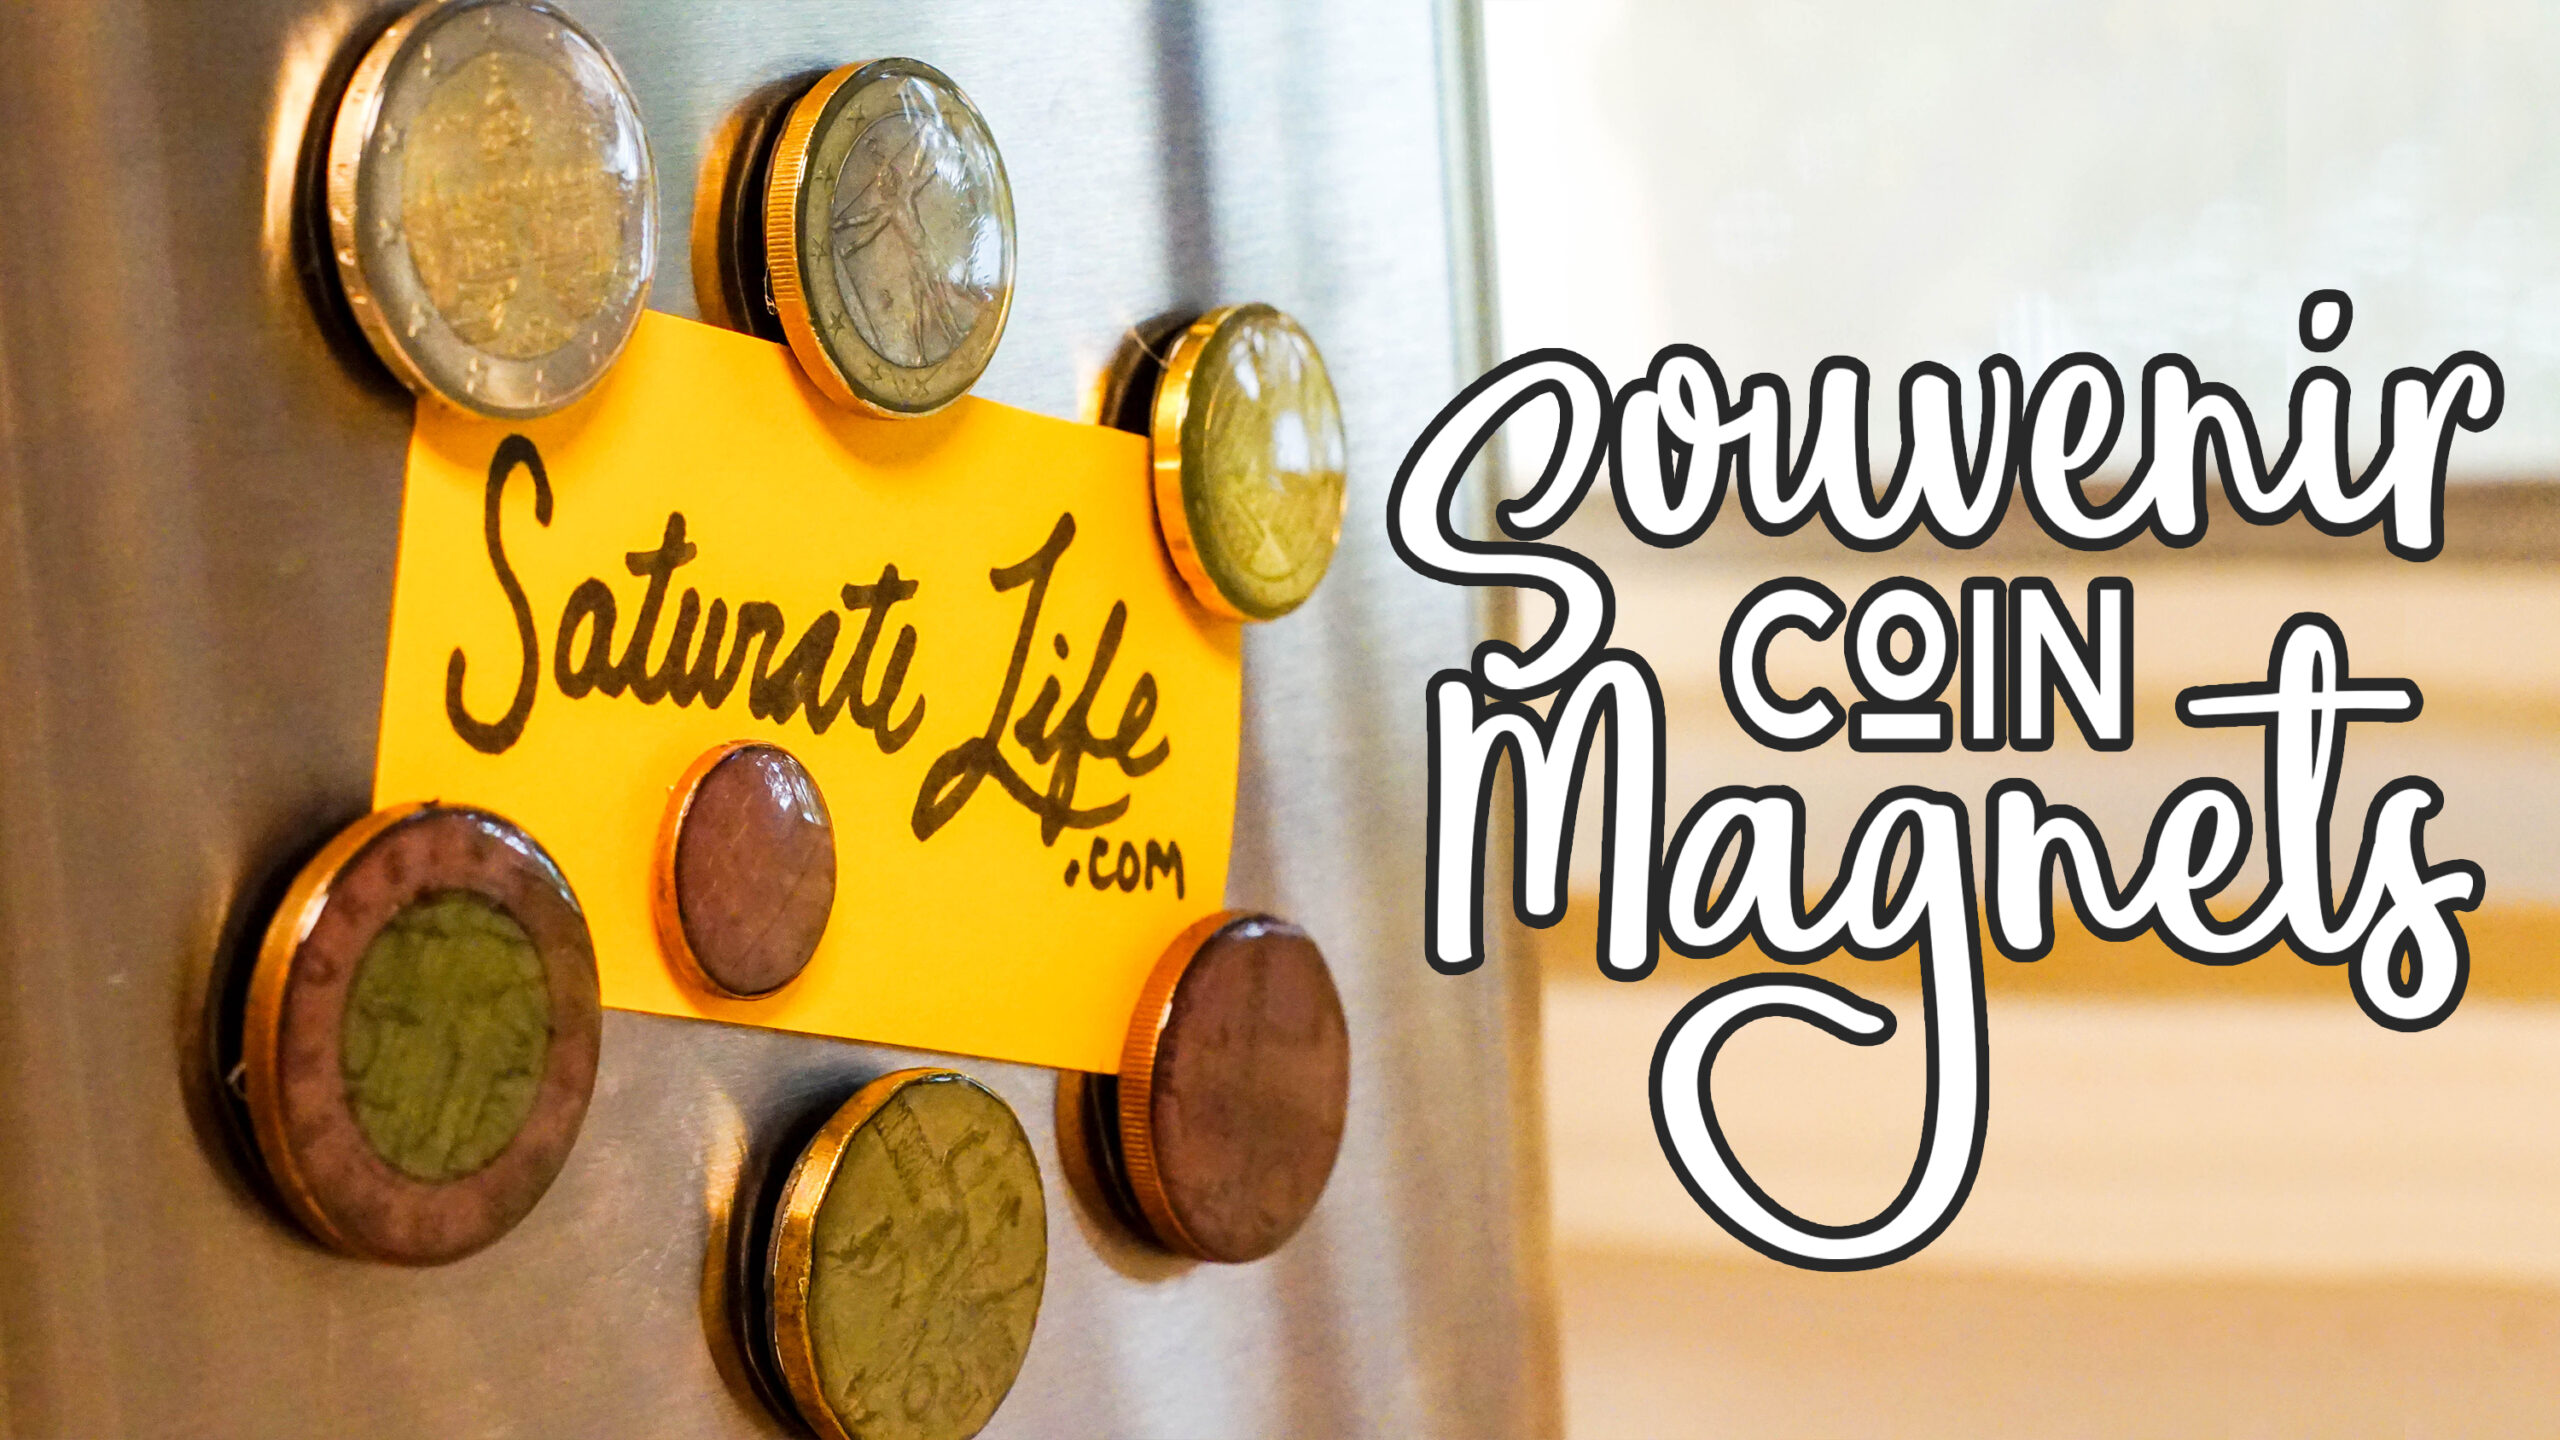 Saturate Life - Souvenir Magnets from Coins